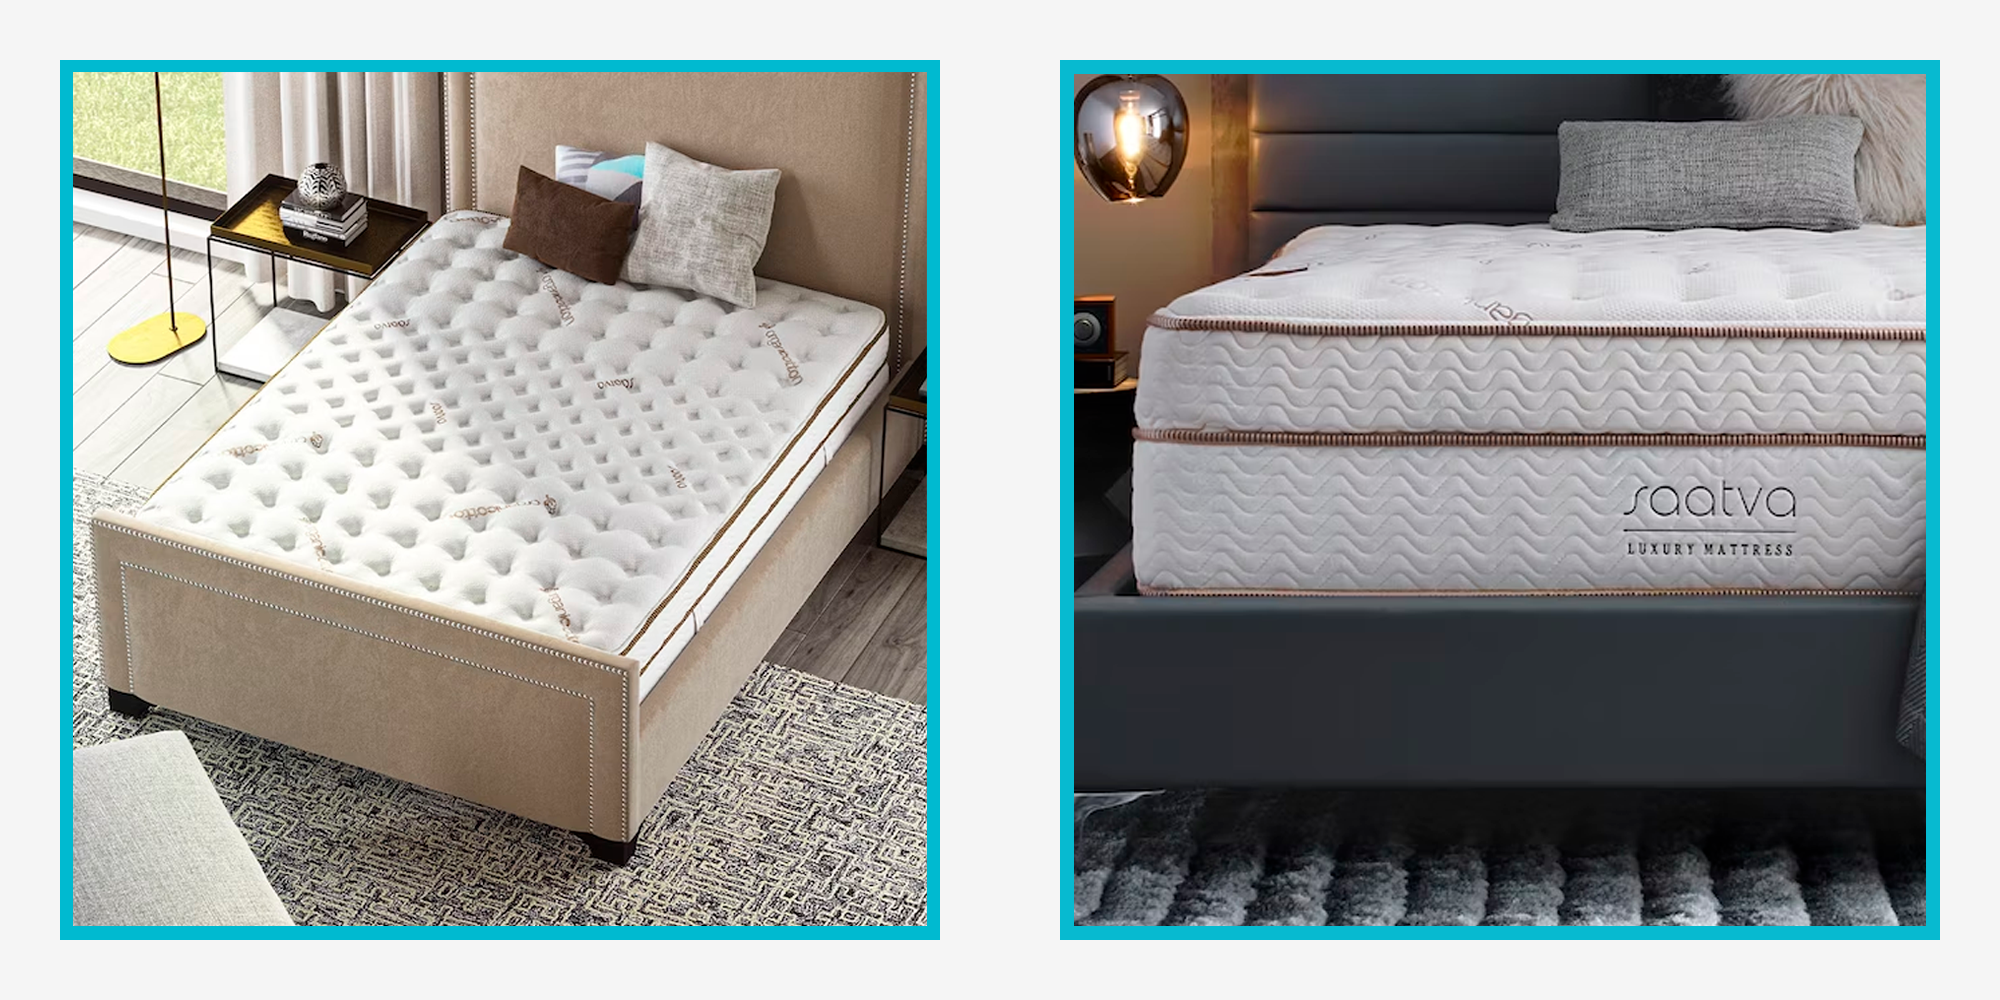 Our Editor-Approved Saatva Classic Mattress Is $300 Off for a Limited Time